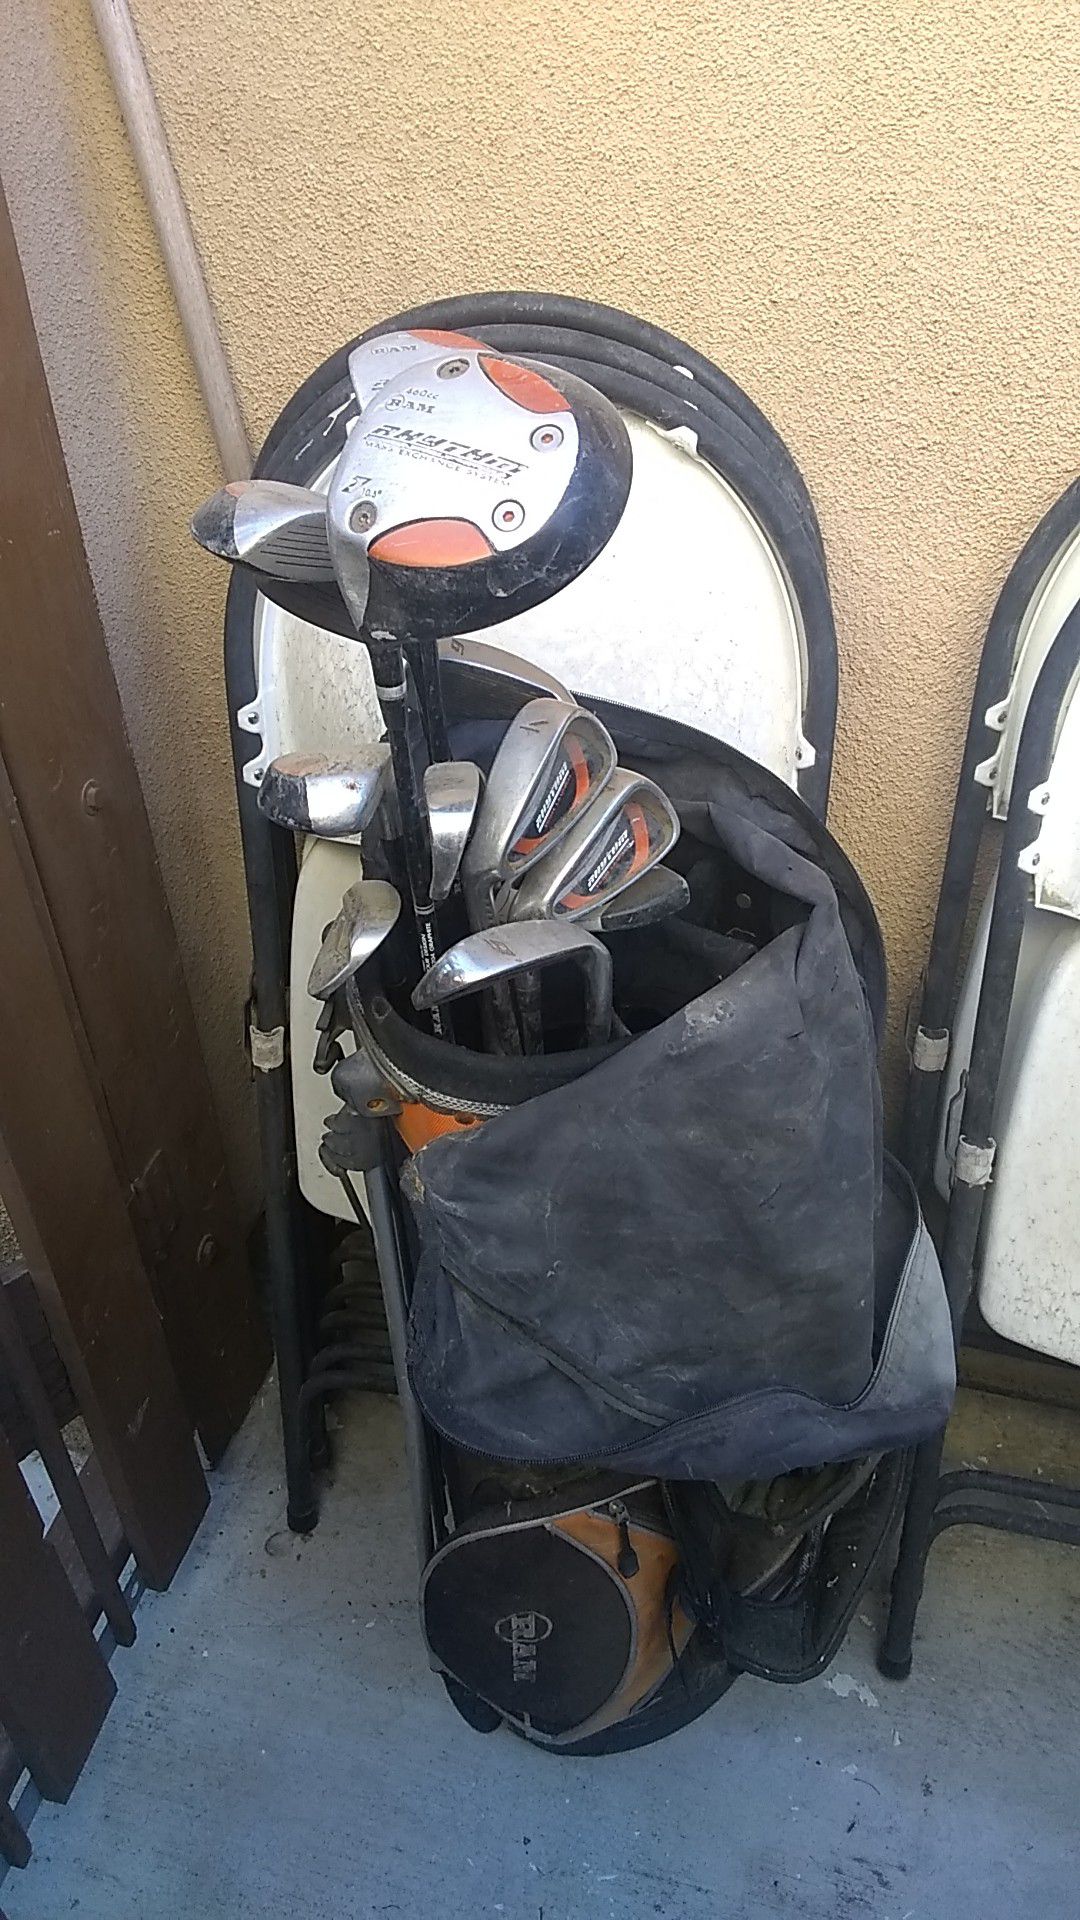 Ram golf clubs left handed sand wedge included